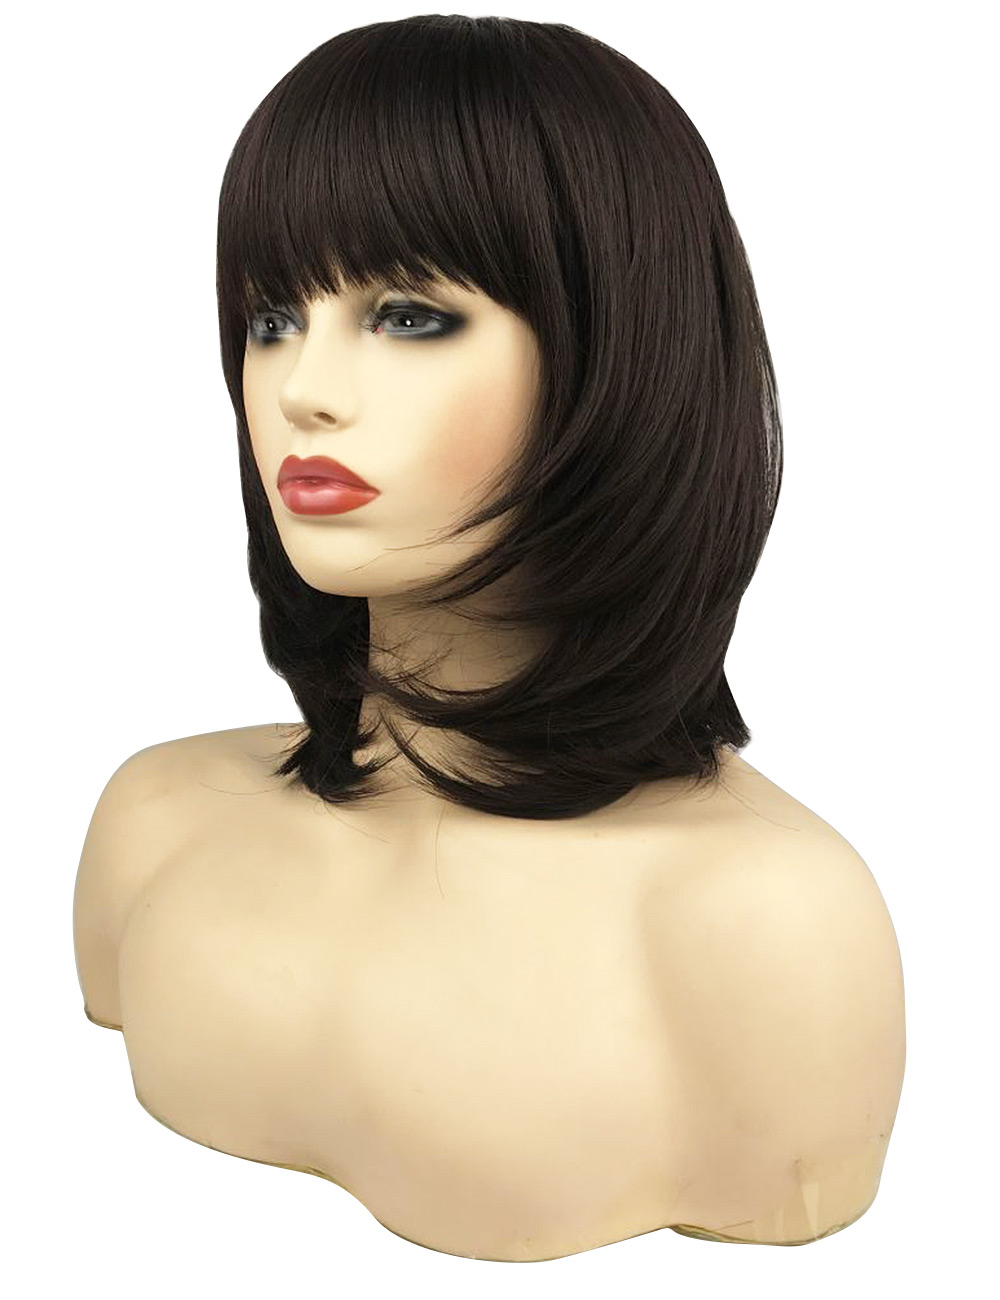 Layered Shag Hairstyle with Full Fringe Middle Length Synthetic Capless Women Wigs 12 Inches